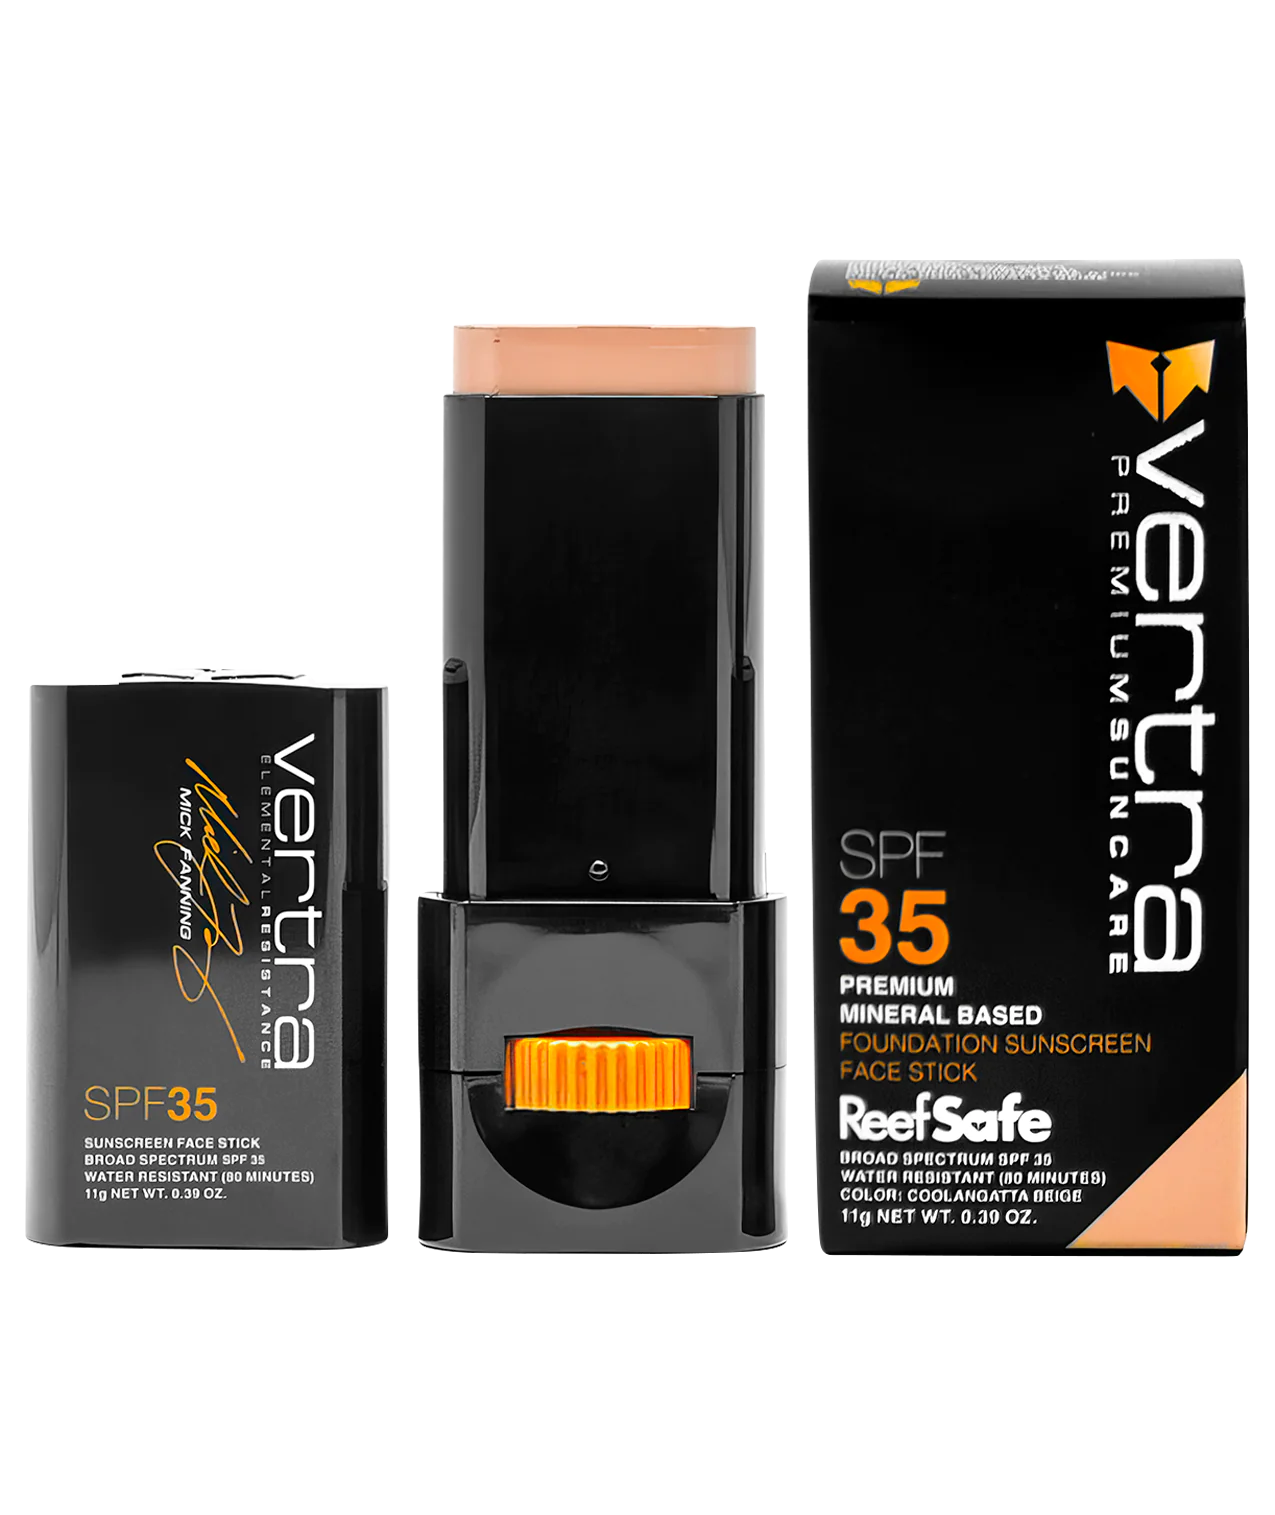 Vertra | Mineral Based Foundation Sunscreen | Color Tinted Face Stick | SPF 35